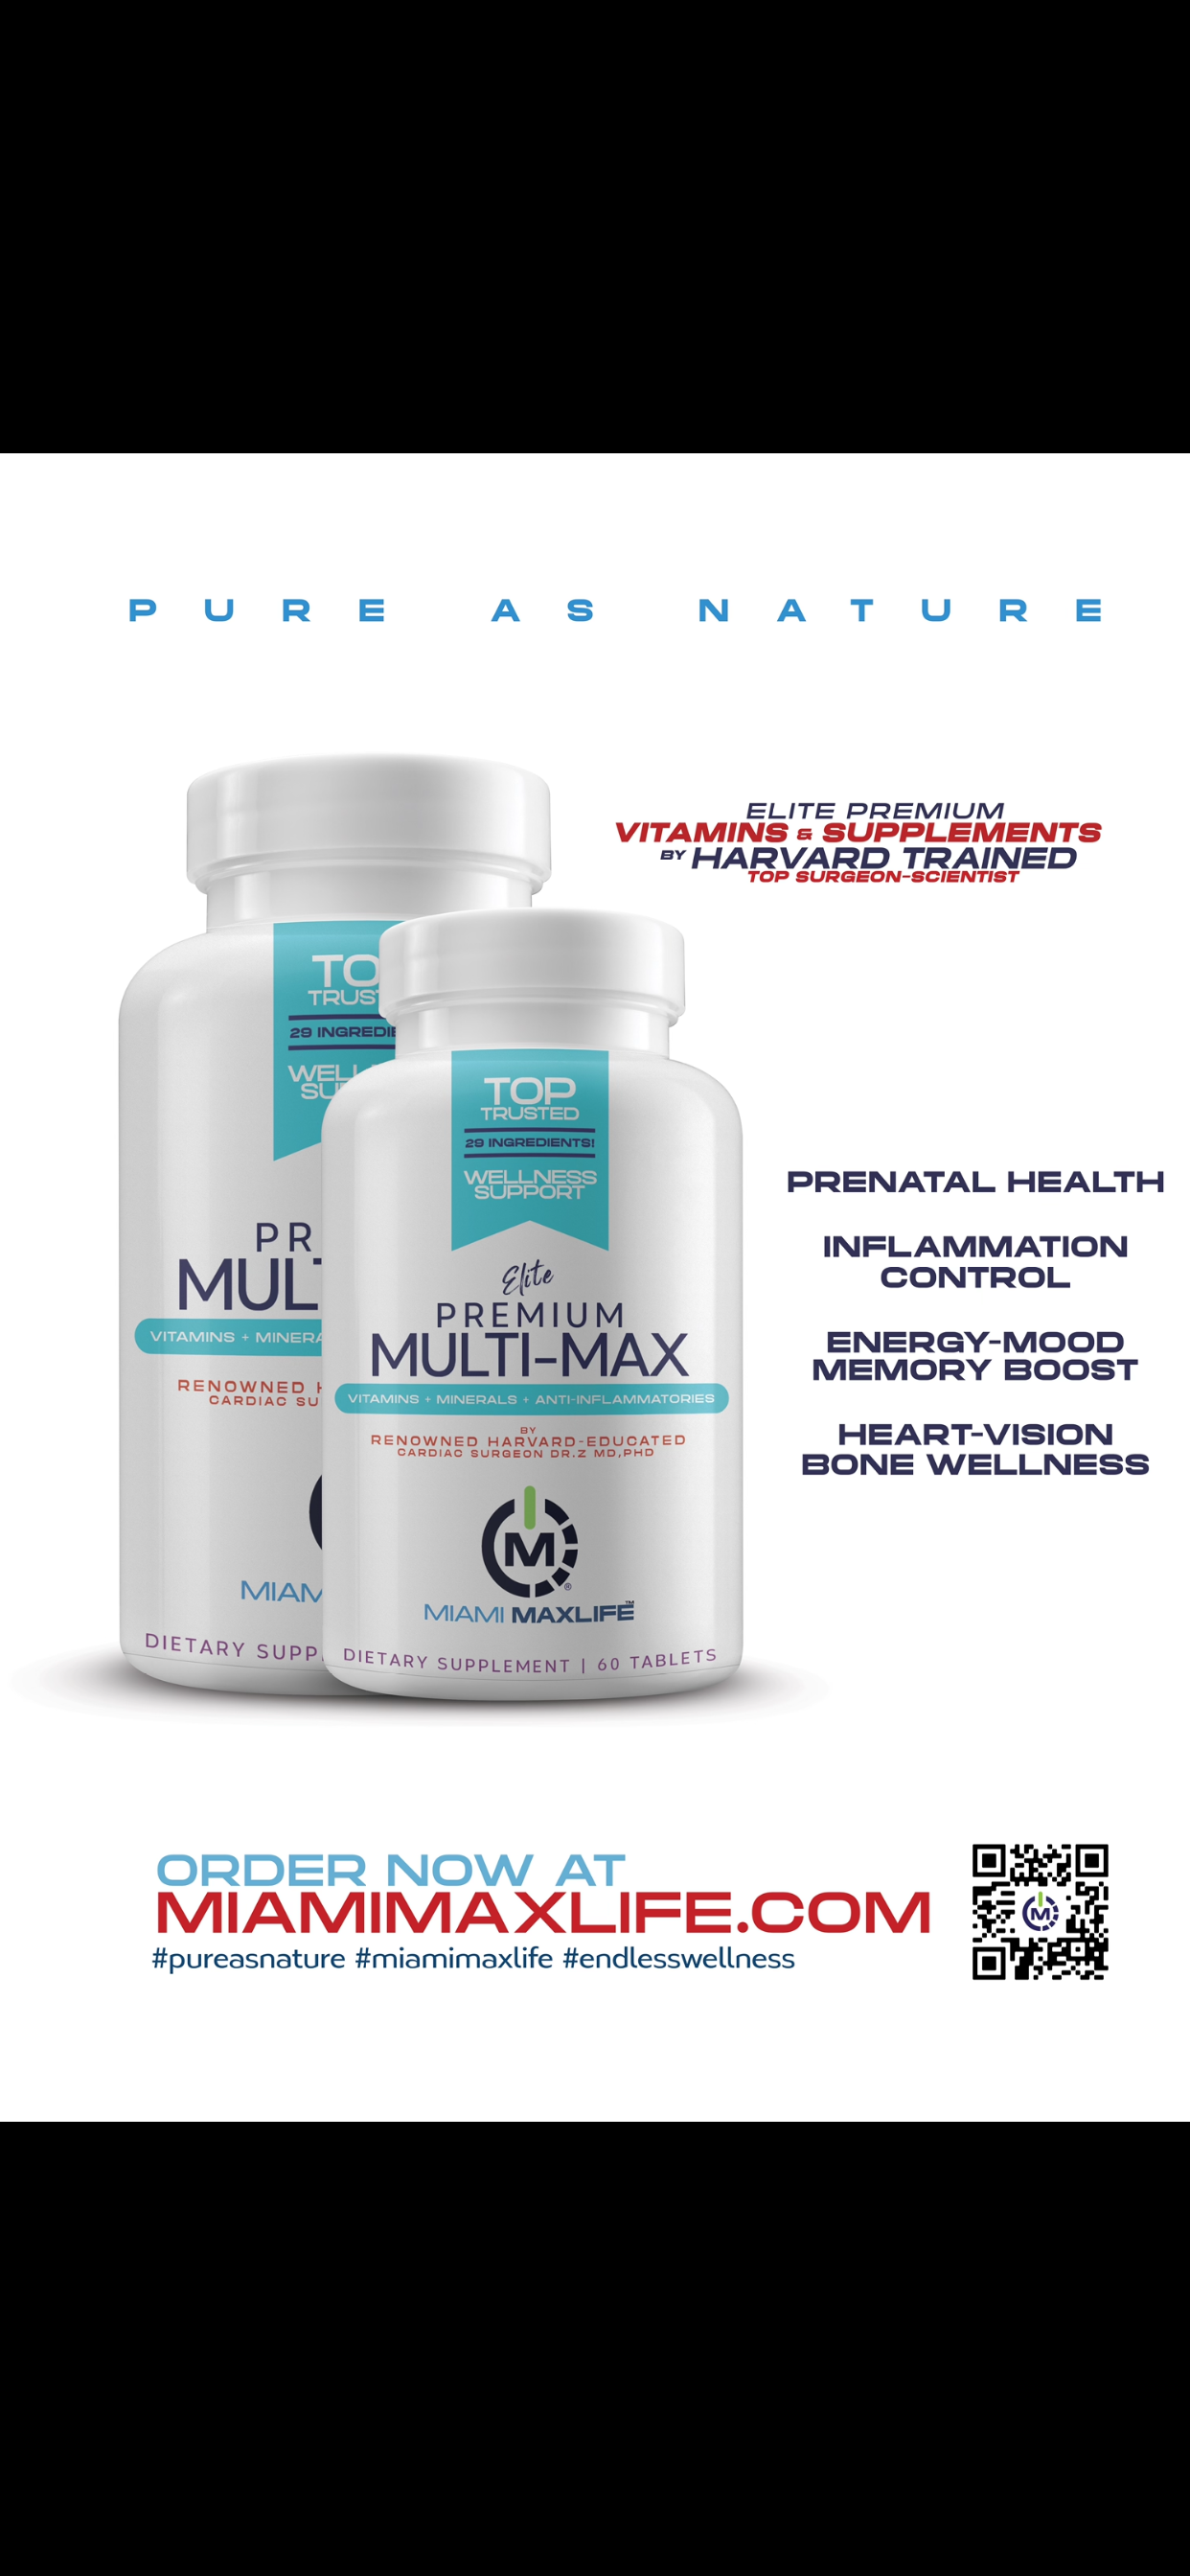 Daily Multivitamin Improves Memory, And Slows Cognitive Aging.